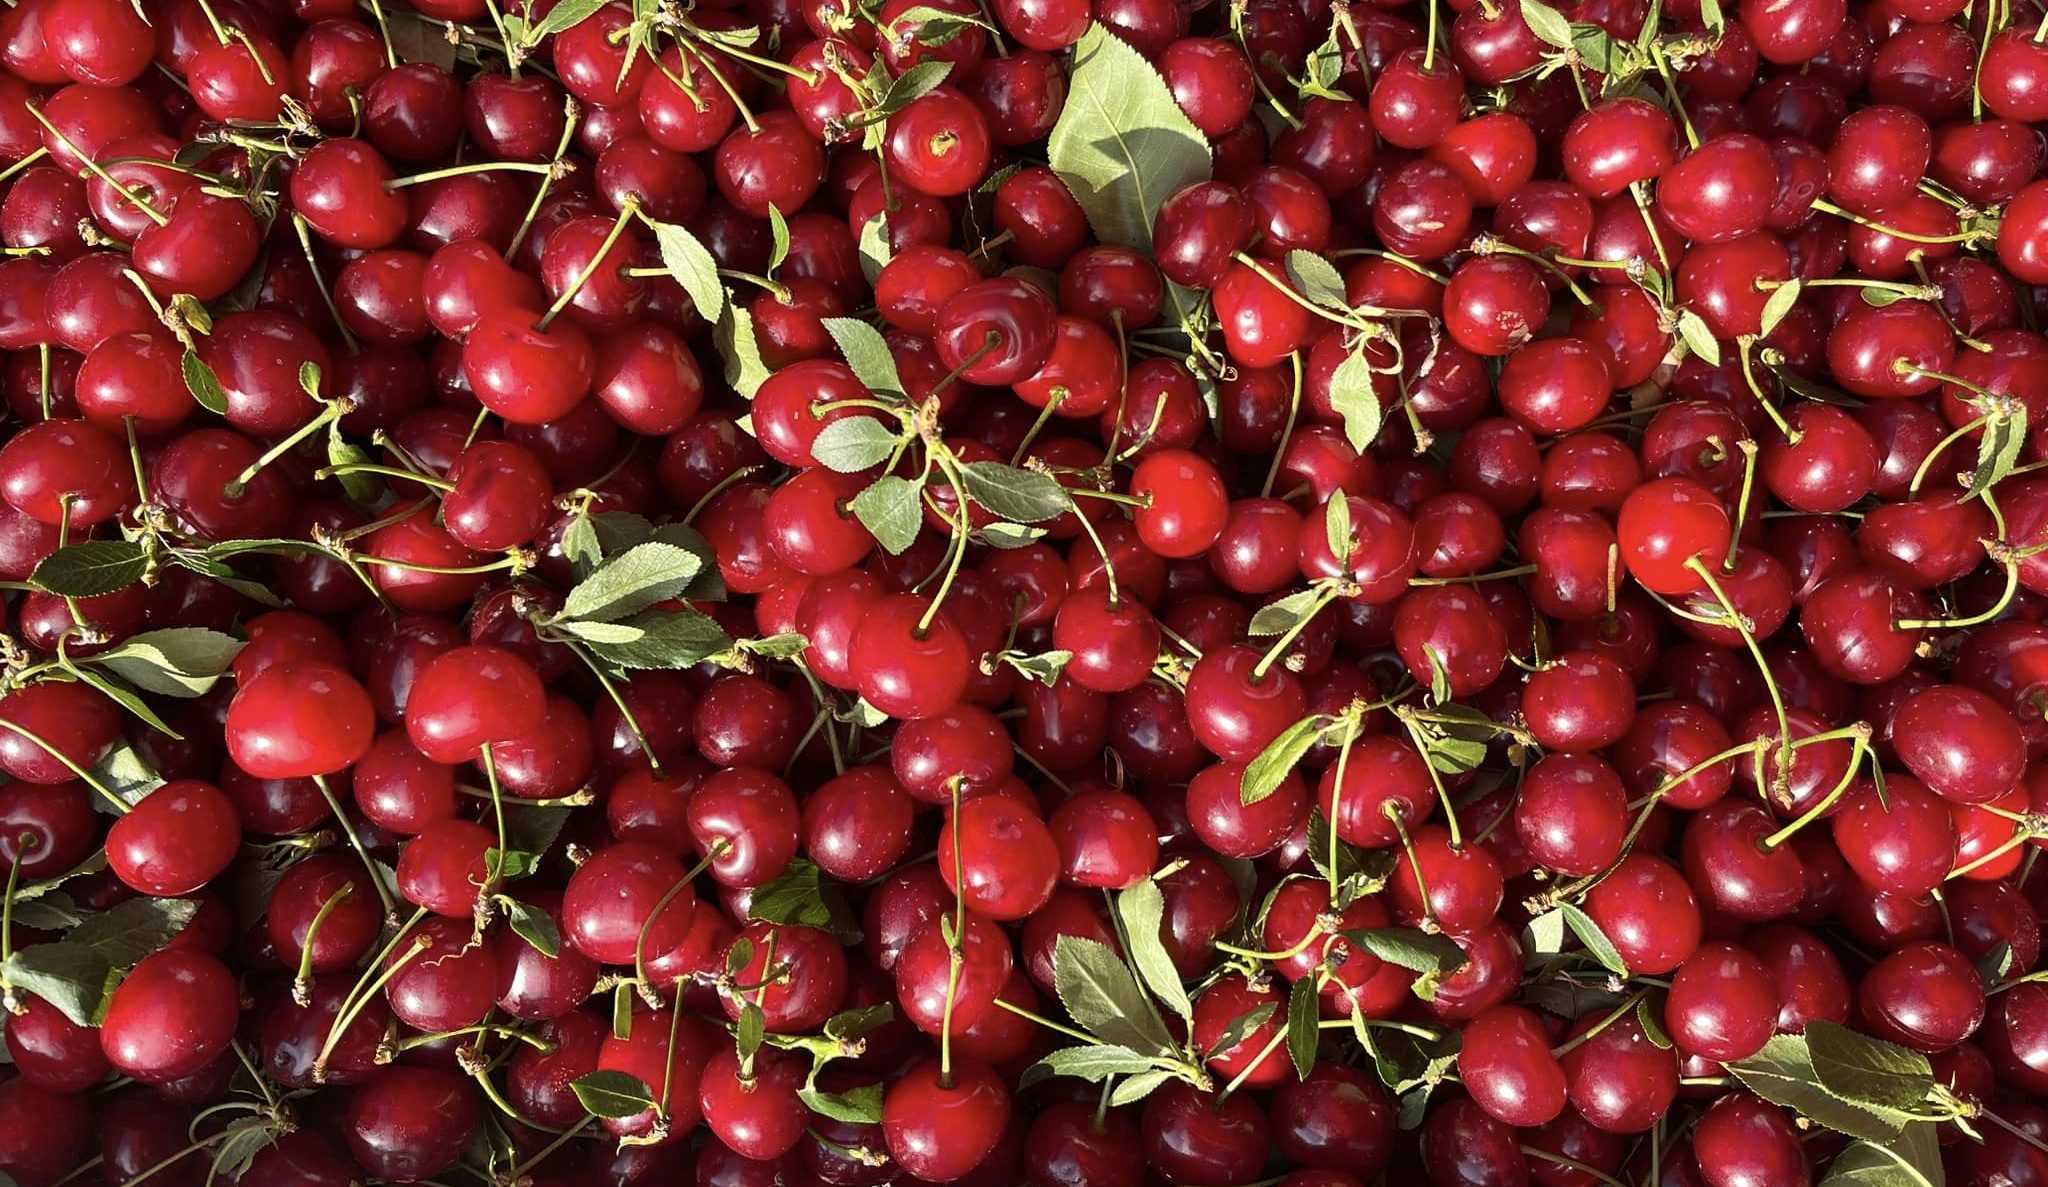 Unique in Quality and Taste: Hungarian Sour Cherries Are Outstanding